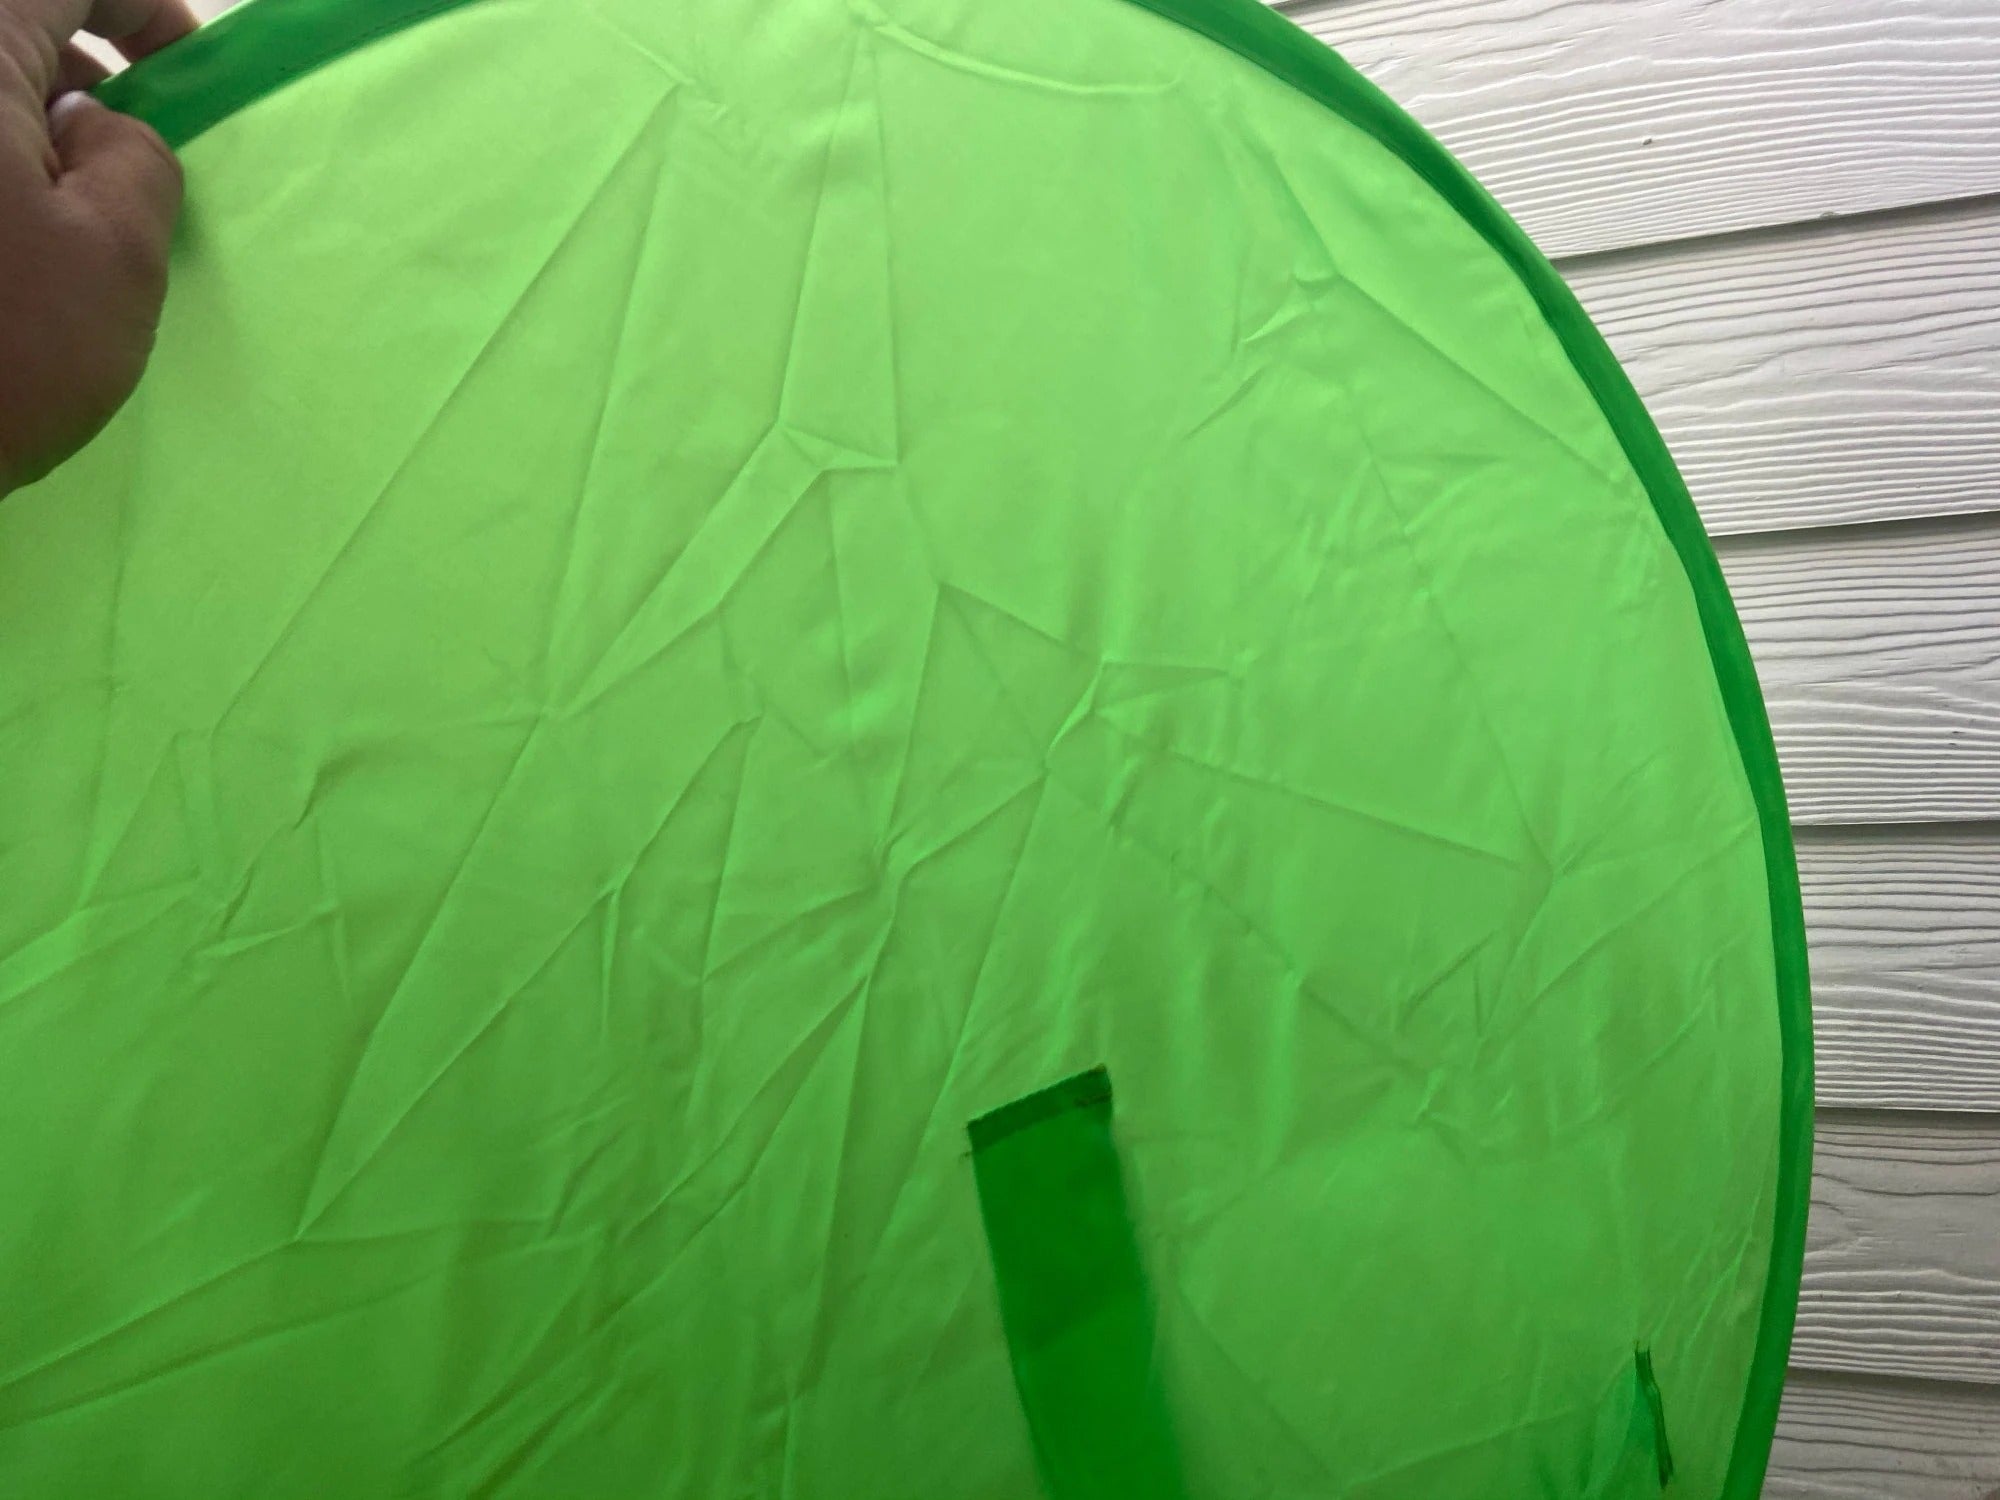 Collapsible Green Screen Background Backdrop For Chair photo review